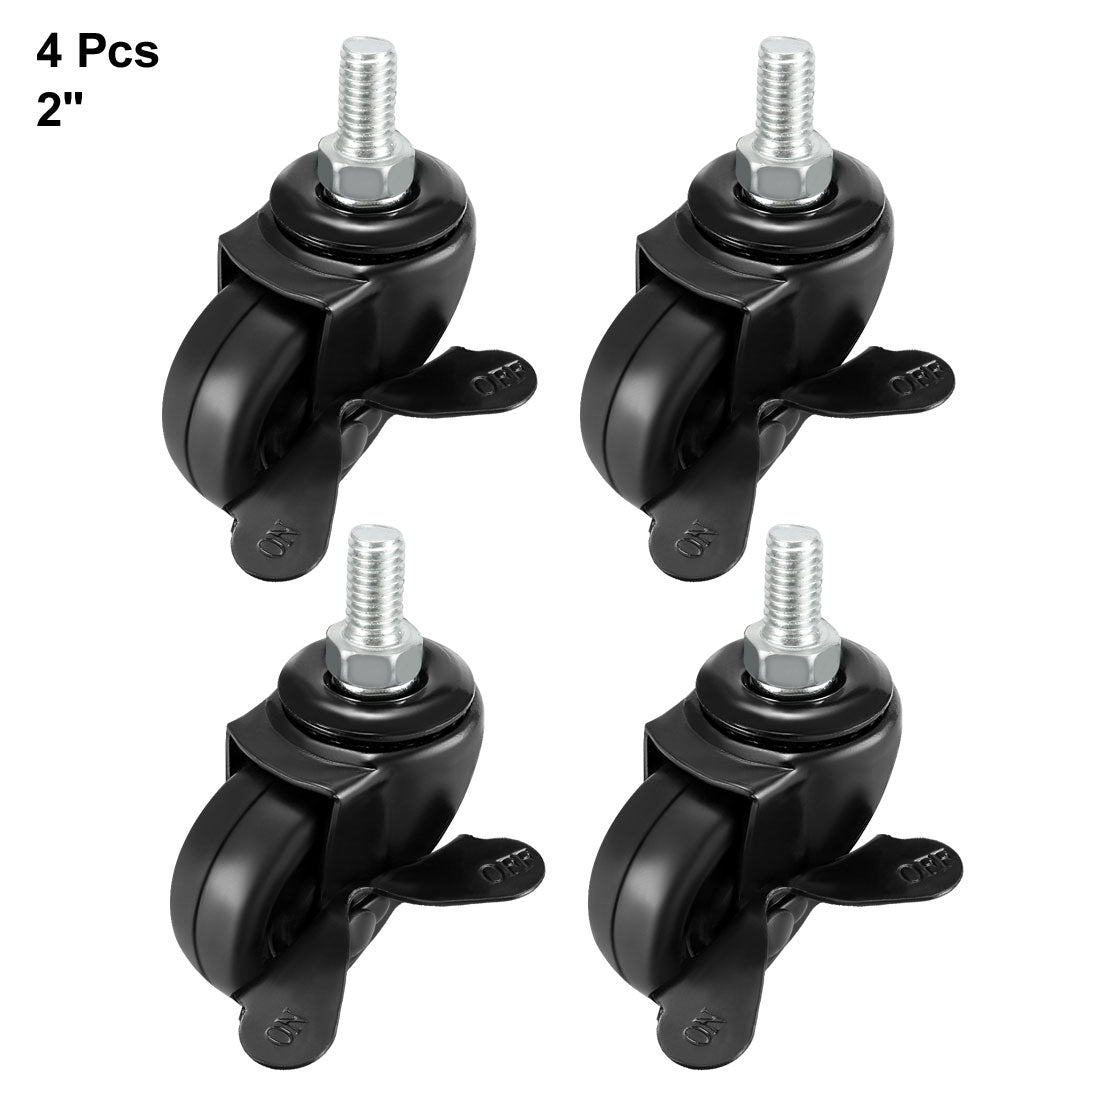 Uxcell Uxcell Swivel Casters 2 Inch Solid Rubber 360 Degree M8 x 15mm Threaded Caster Wheels with Brake Black 44lb Capacity Each , 8 Pcs